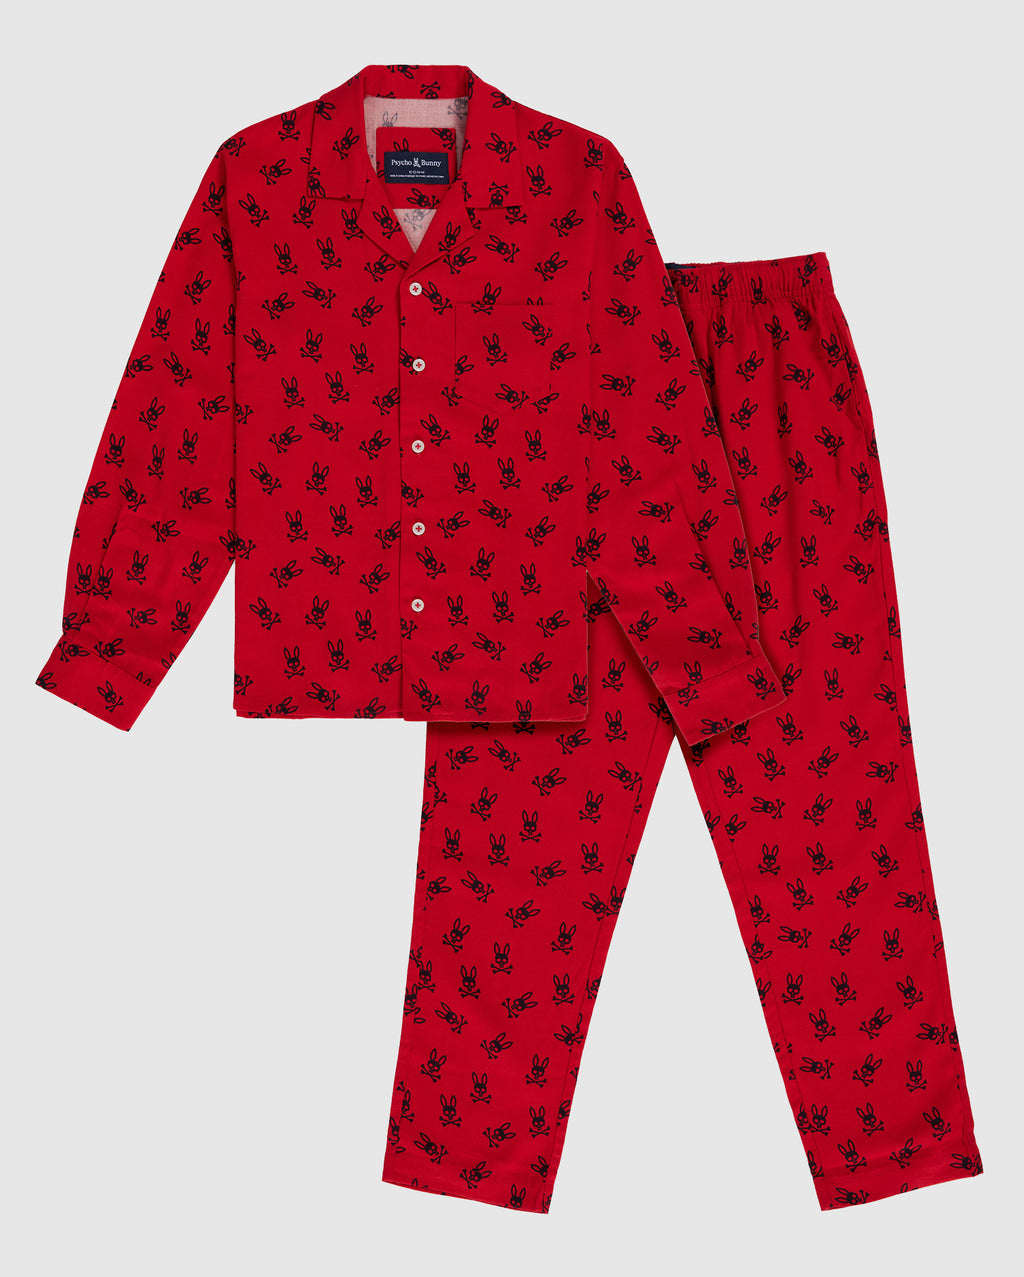 FRED IS RED beat-up youth XL pajama pants Snow Bunny lounge wear